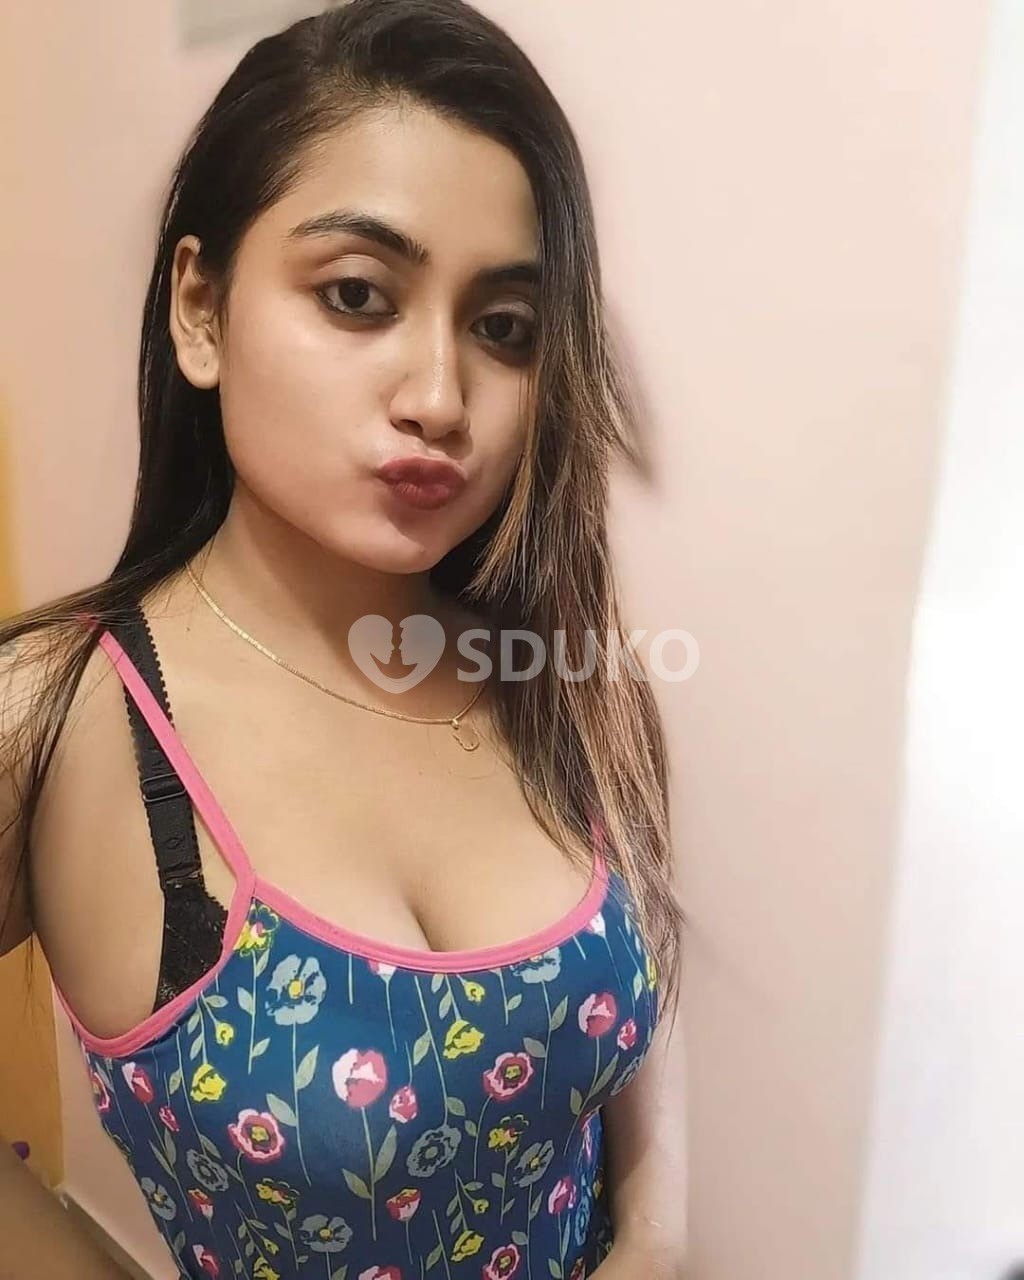 Rudrapur ❣️❣️Low price high profile college girl and aunty available any time available service genuine vip call